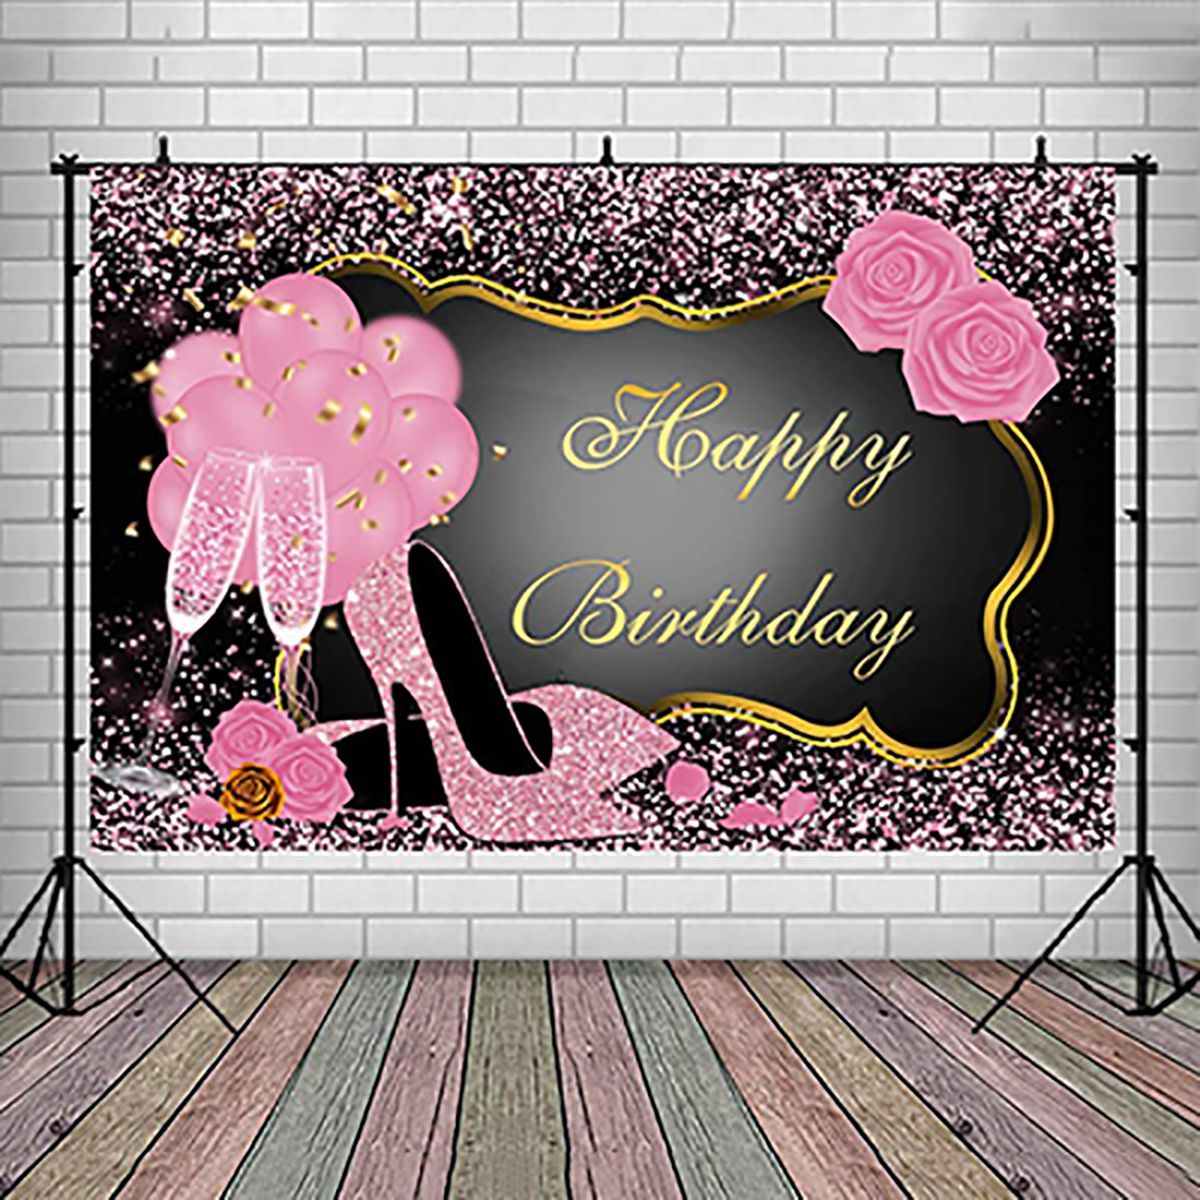 Sweet-Pink-Happy-Birthday-Photography-Backdrop-Rose-Shiny-Sequins-High-Heels-Party-Backdrop-1812538